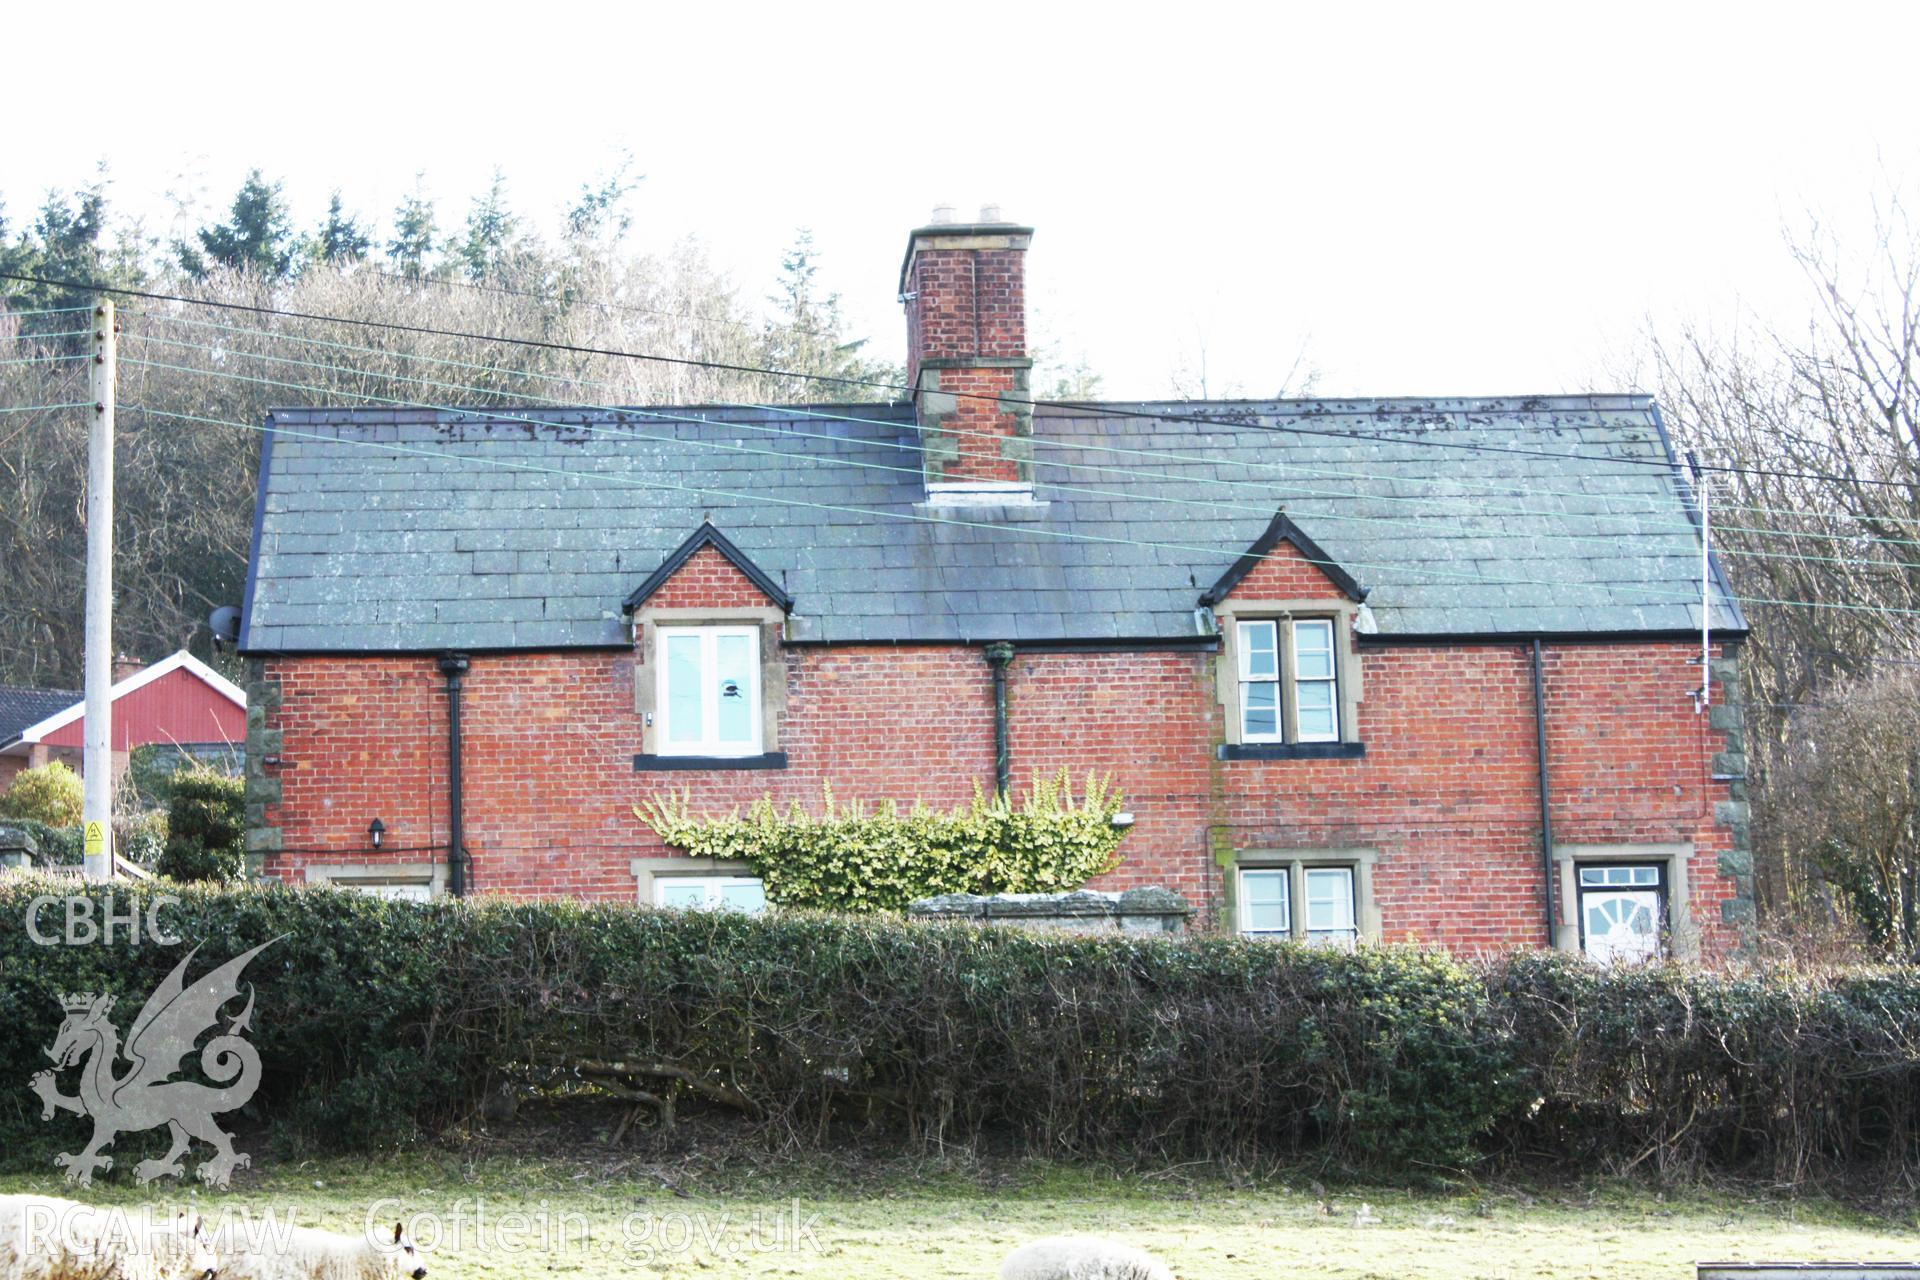 Colour photograph showing red brick exterior of Pentre Cottages, Leighton. Photographed during survey conducted by Geoff Ward on 11th July 2009.